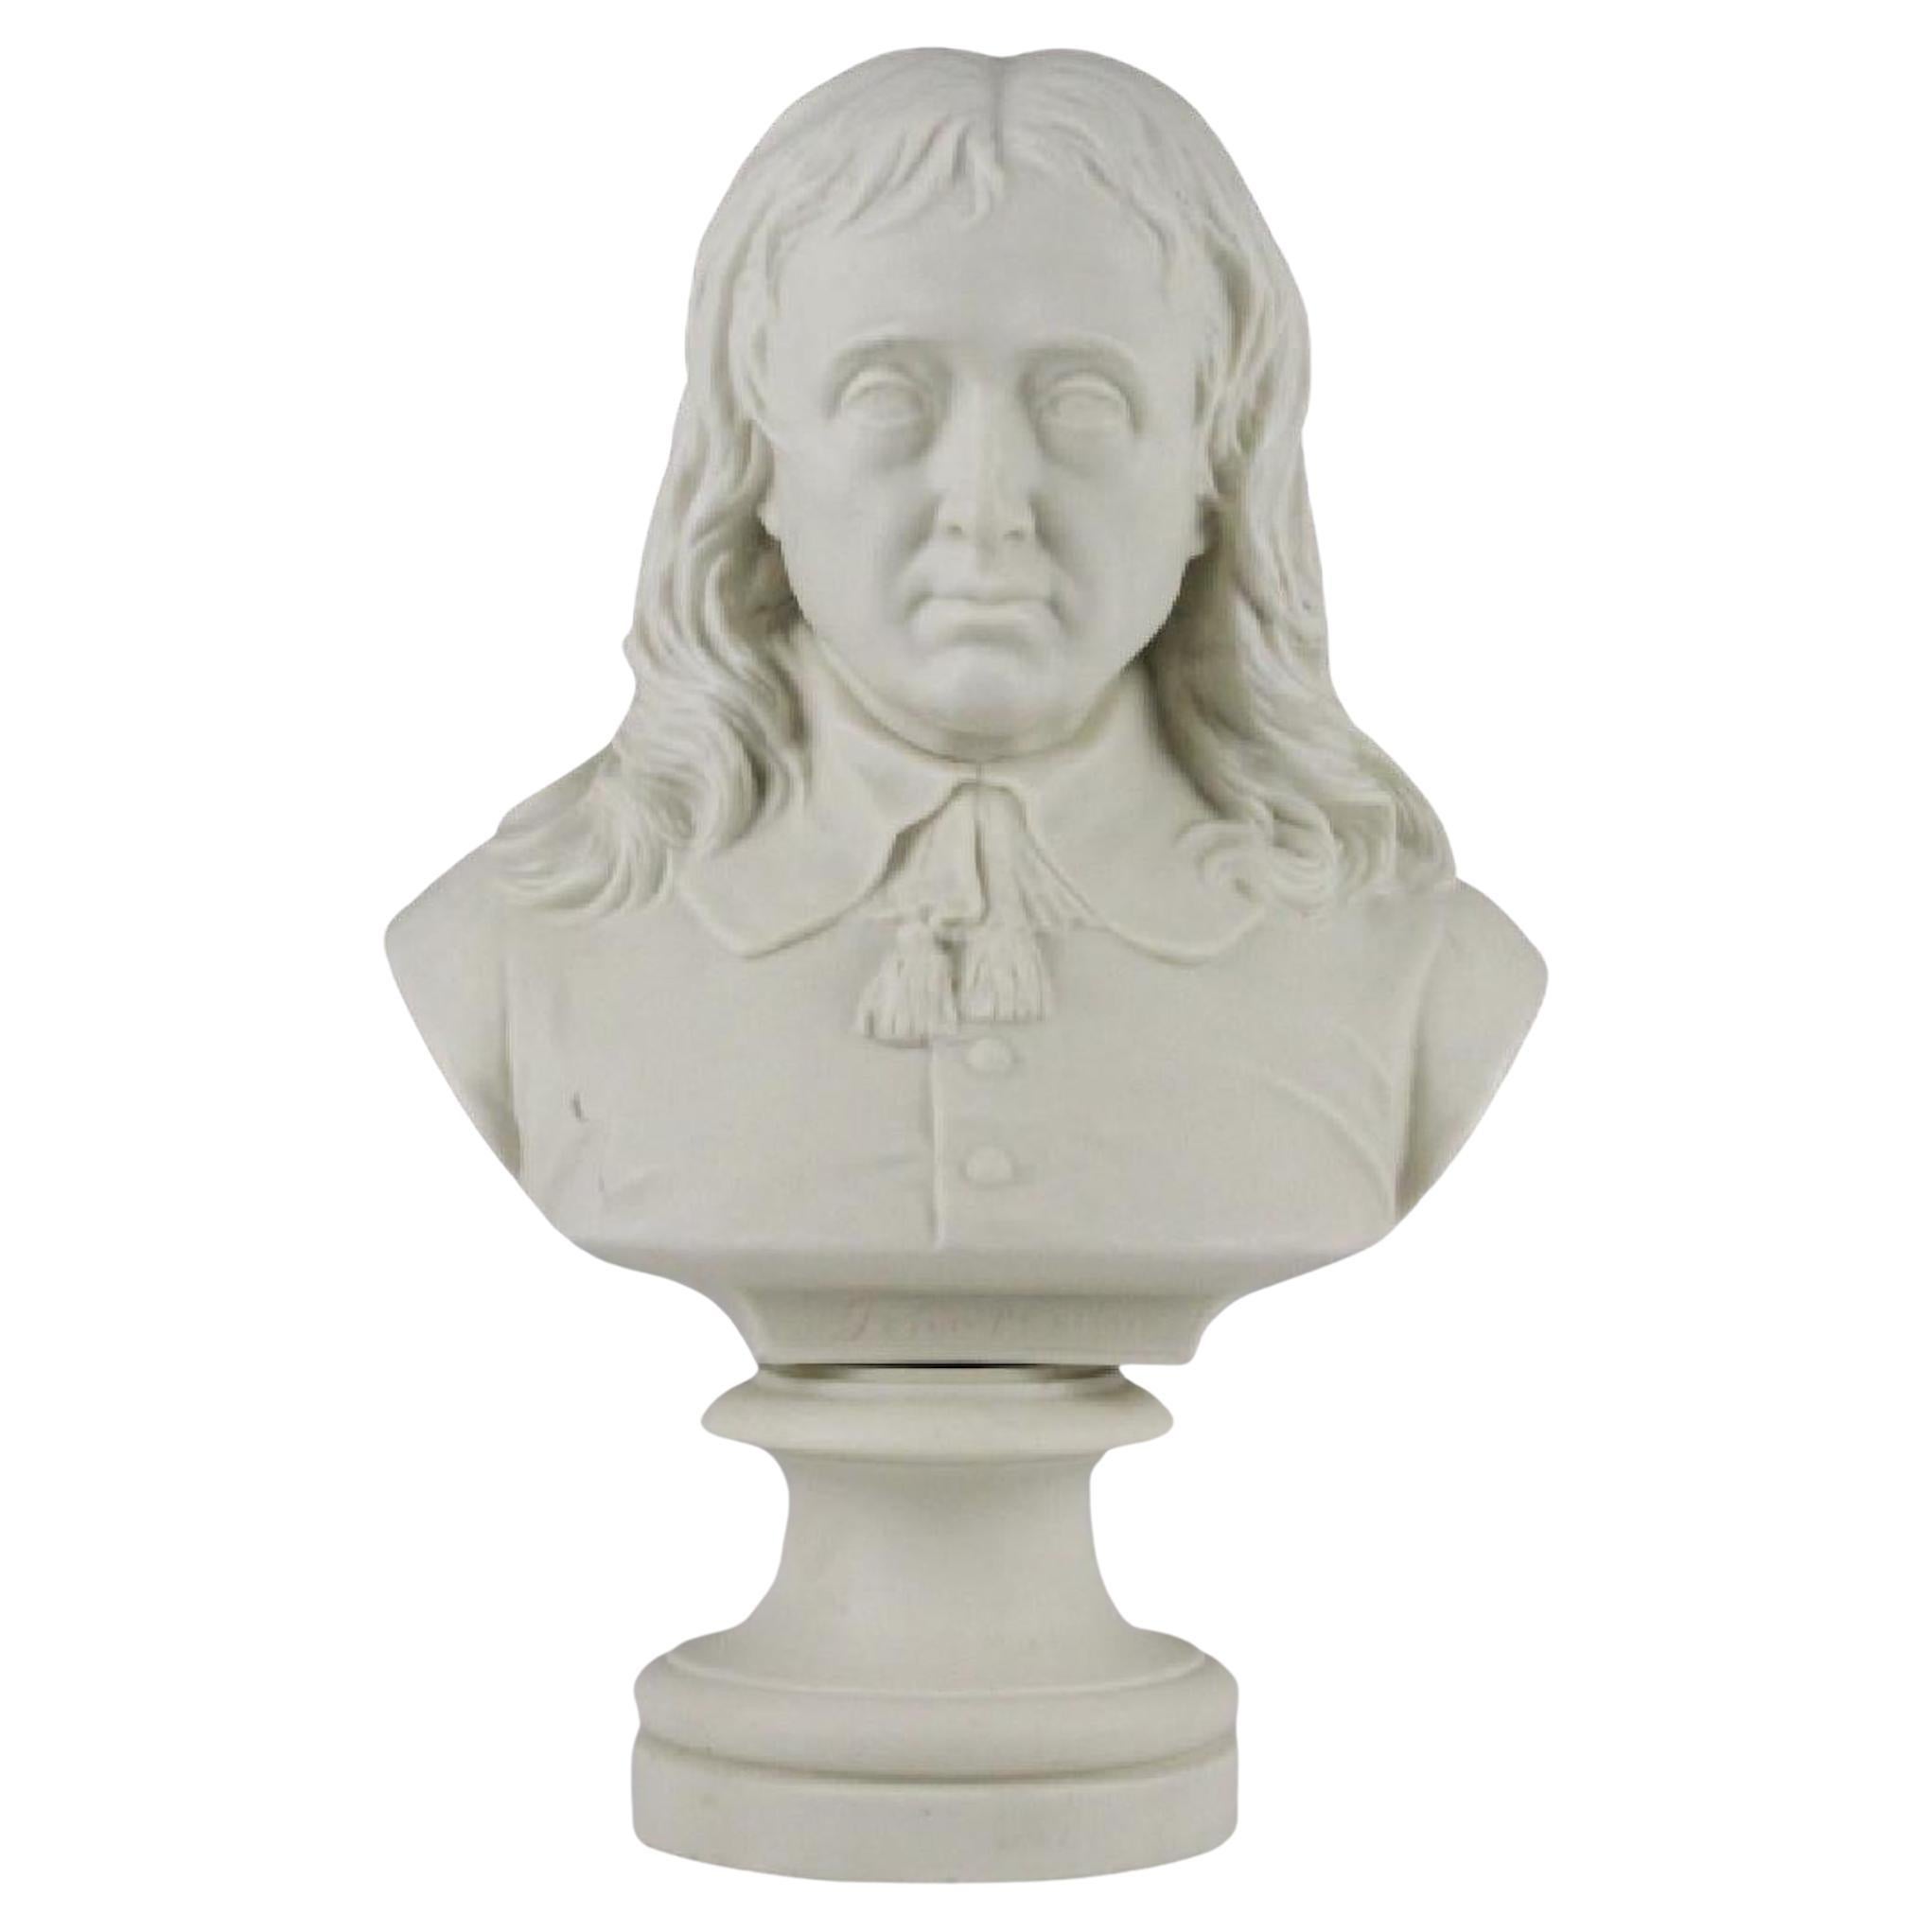 Copeland Parian Bust of John Milton, Made for the 1861 Crystal Palace Exhibition